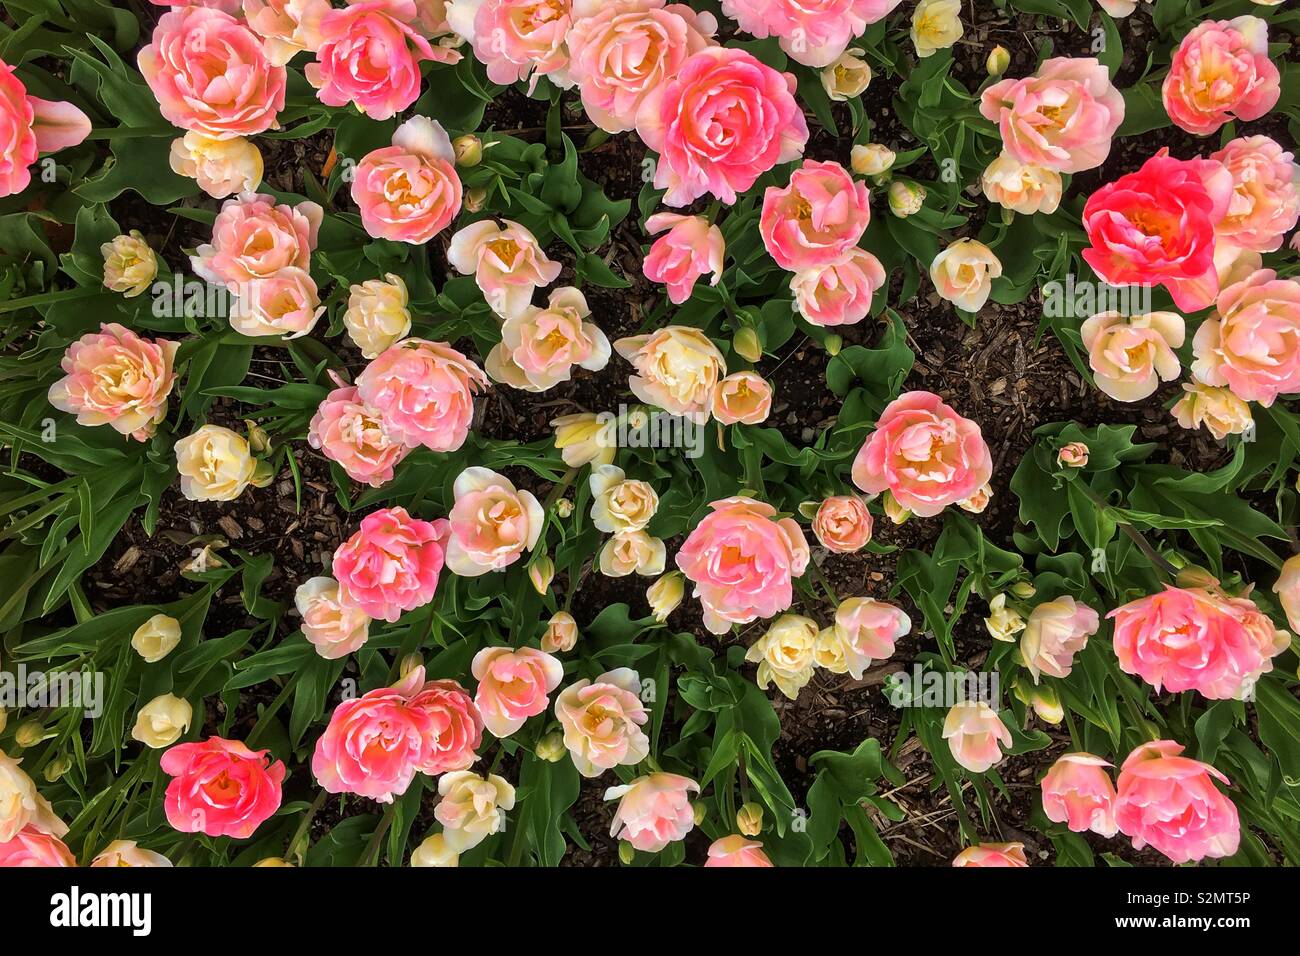 Field of pink carnations in full bloom. Stock Photo